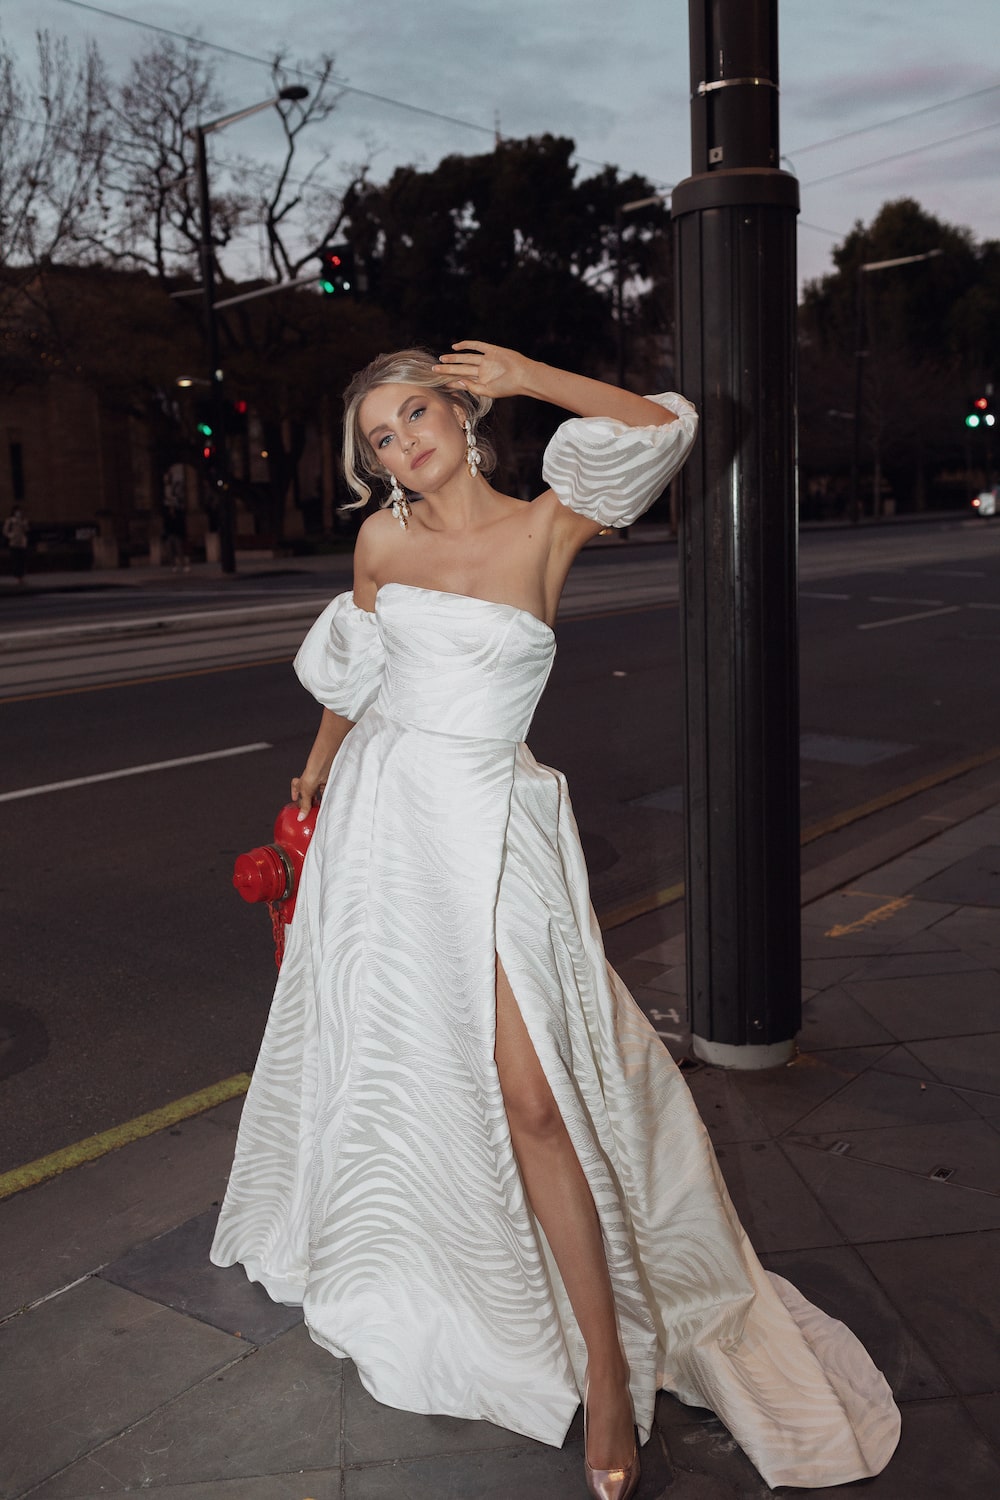 Model on sidewalk next to fire hydrant at night, posing with one arm up to her head, wearing the Concerto gown